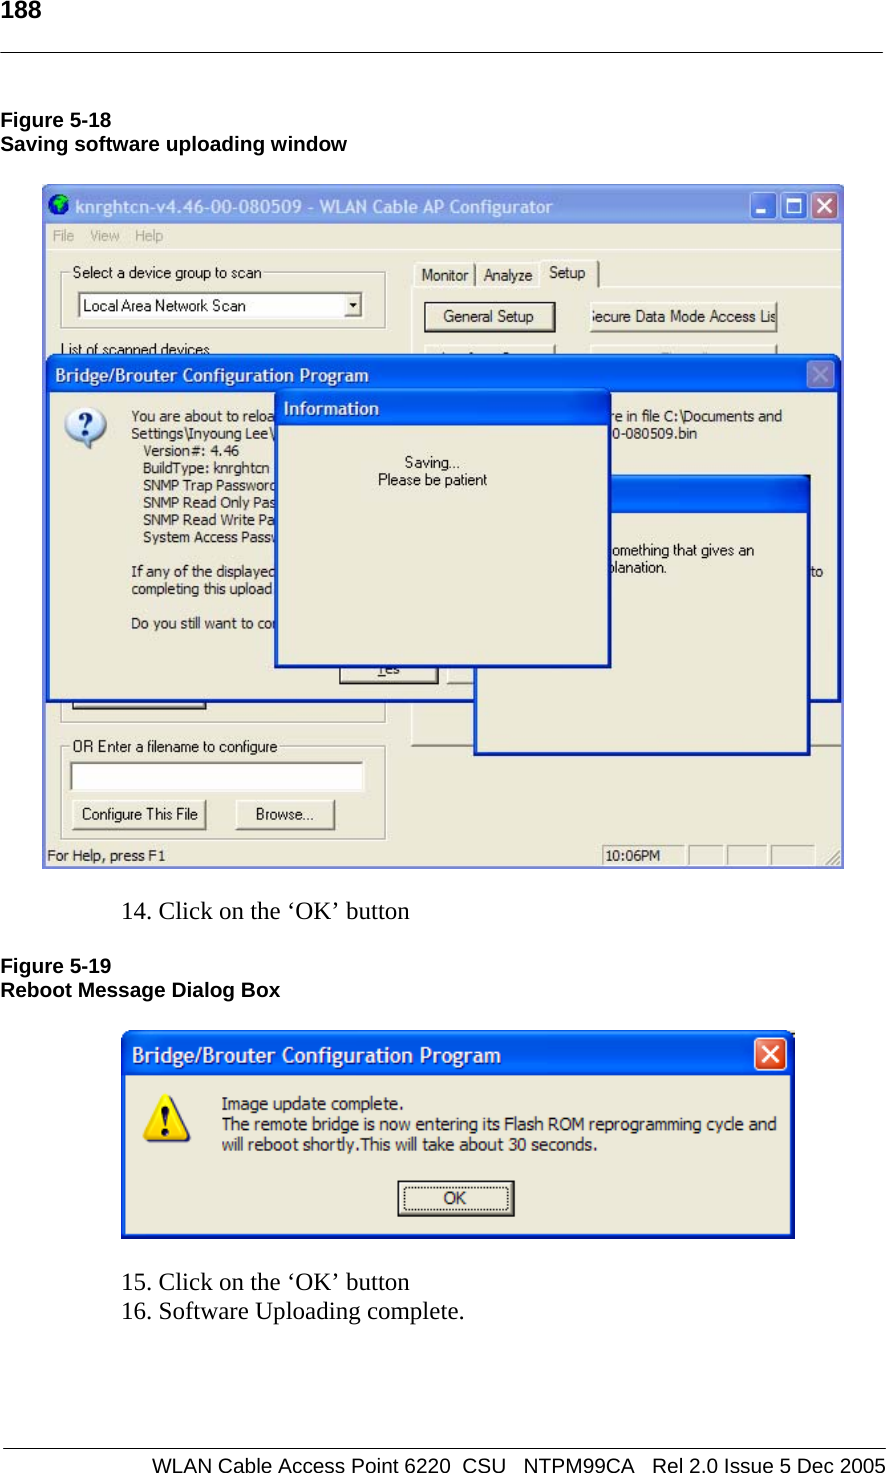   188    WLAN Cable Access Point 6220  CSU   NTPM99CA   Rel 2.0 Issue 5 Dec 2005 Figure 5-18 Saving software uploading window    14. Click on the ‘OK’ button  Figure 5-19 Reboot Message Dialog Box    15. Click on the ‘OK’ button 16. Software Uploading complete.     